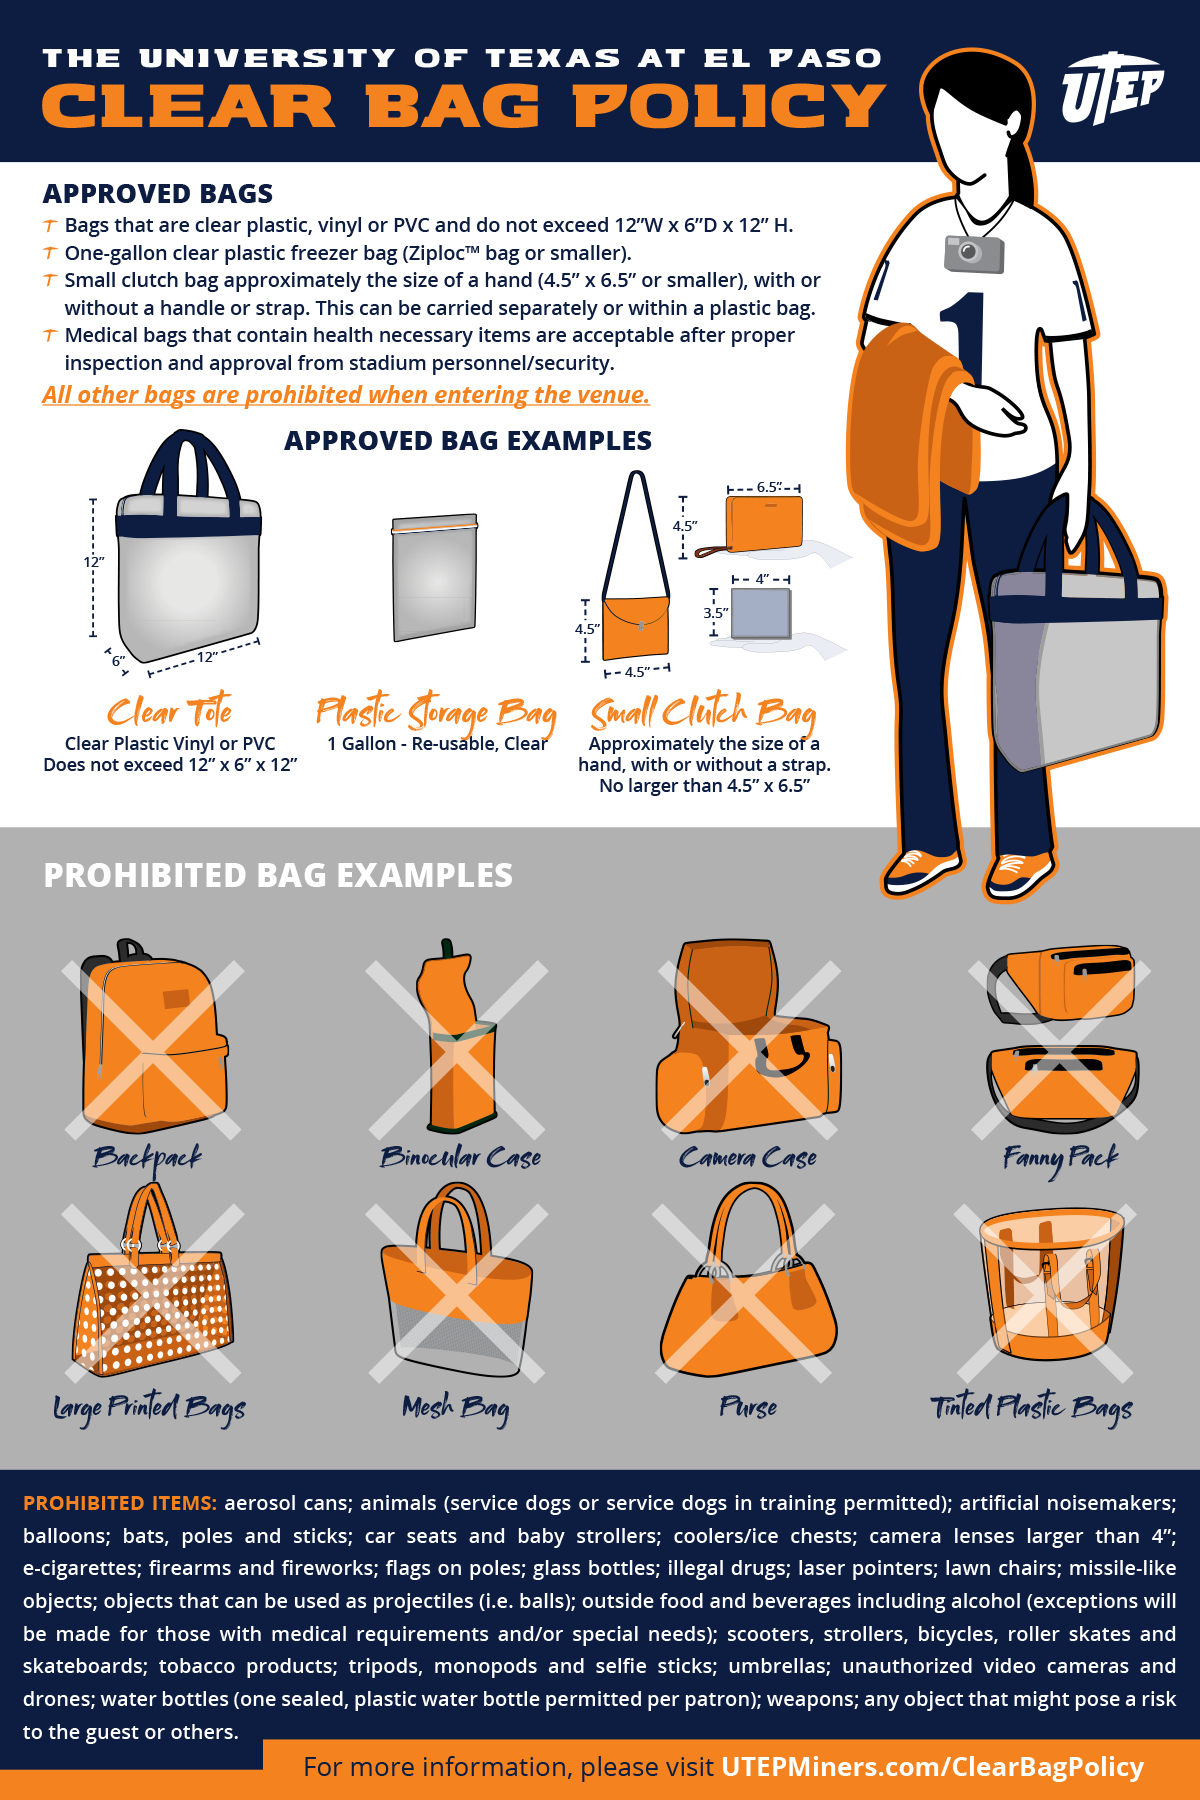 Prohibited Items & Bag Policy